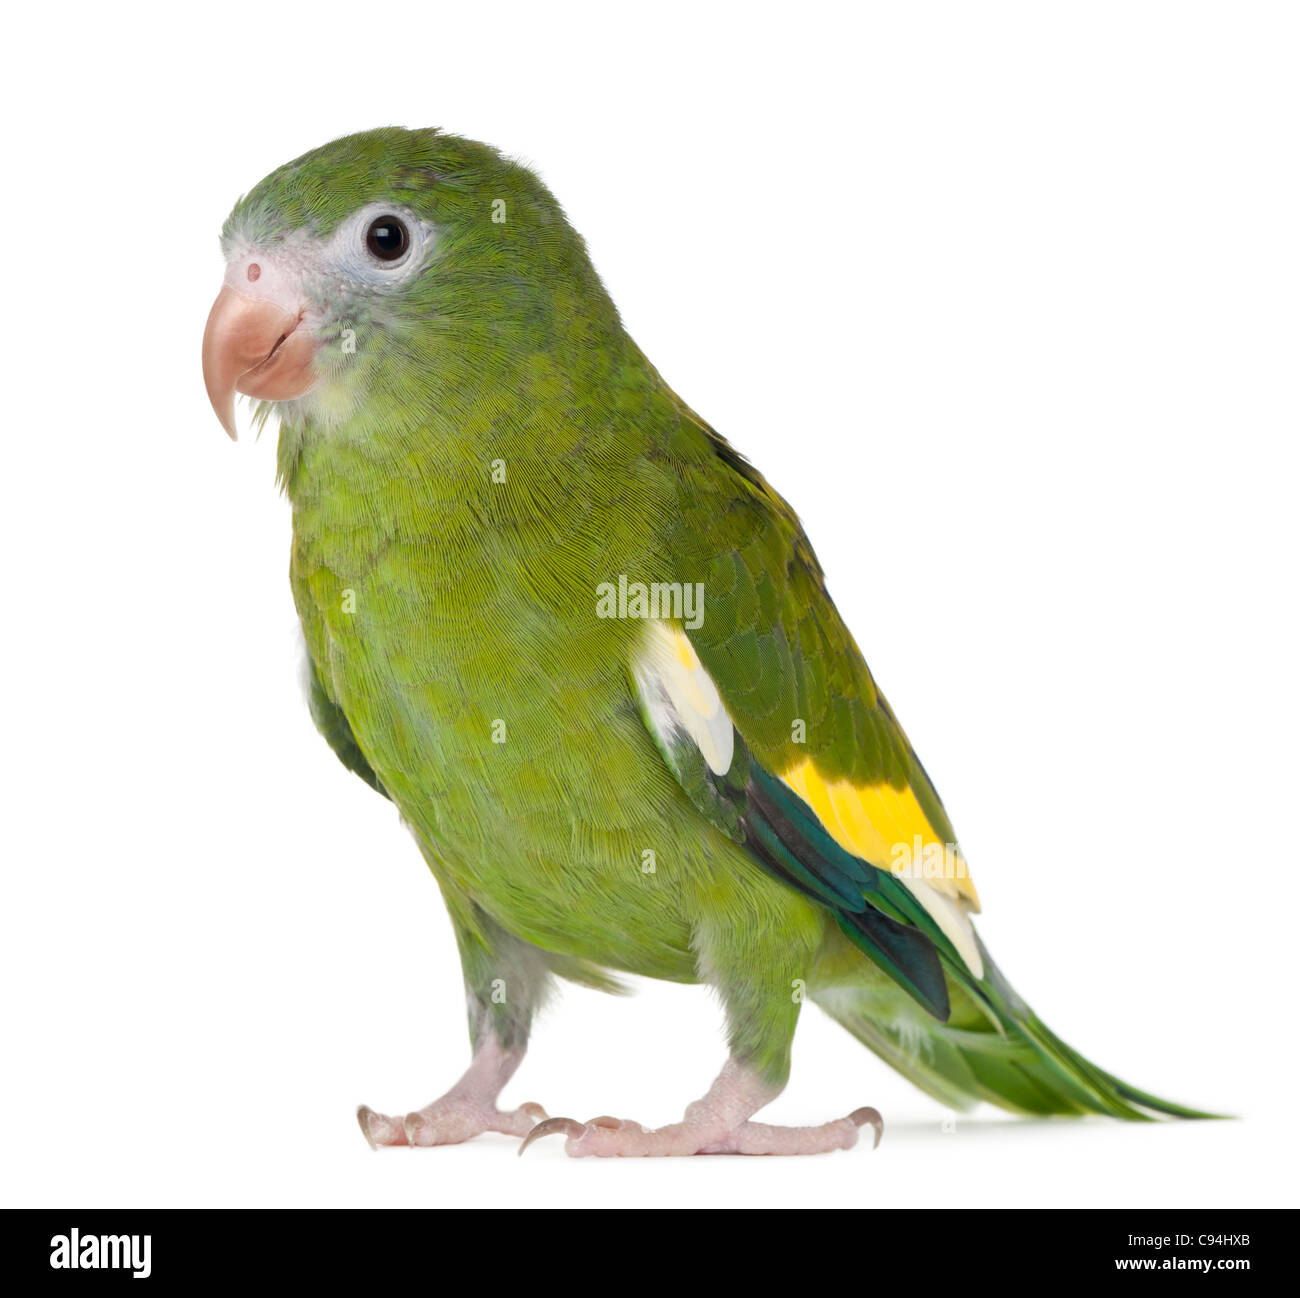 White-winged Parakeet Brotogeris versicolurus,, 5 ans, in front of white background Banque D'Images